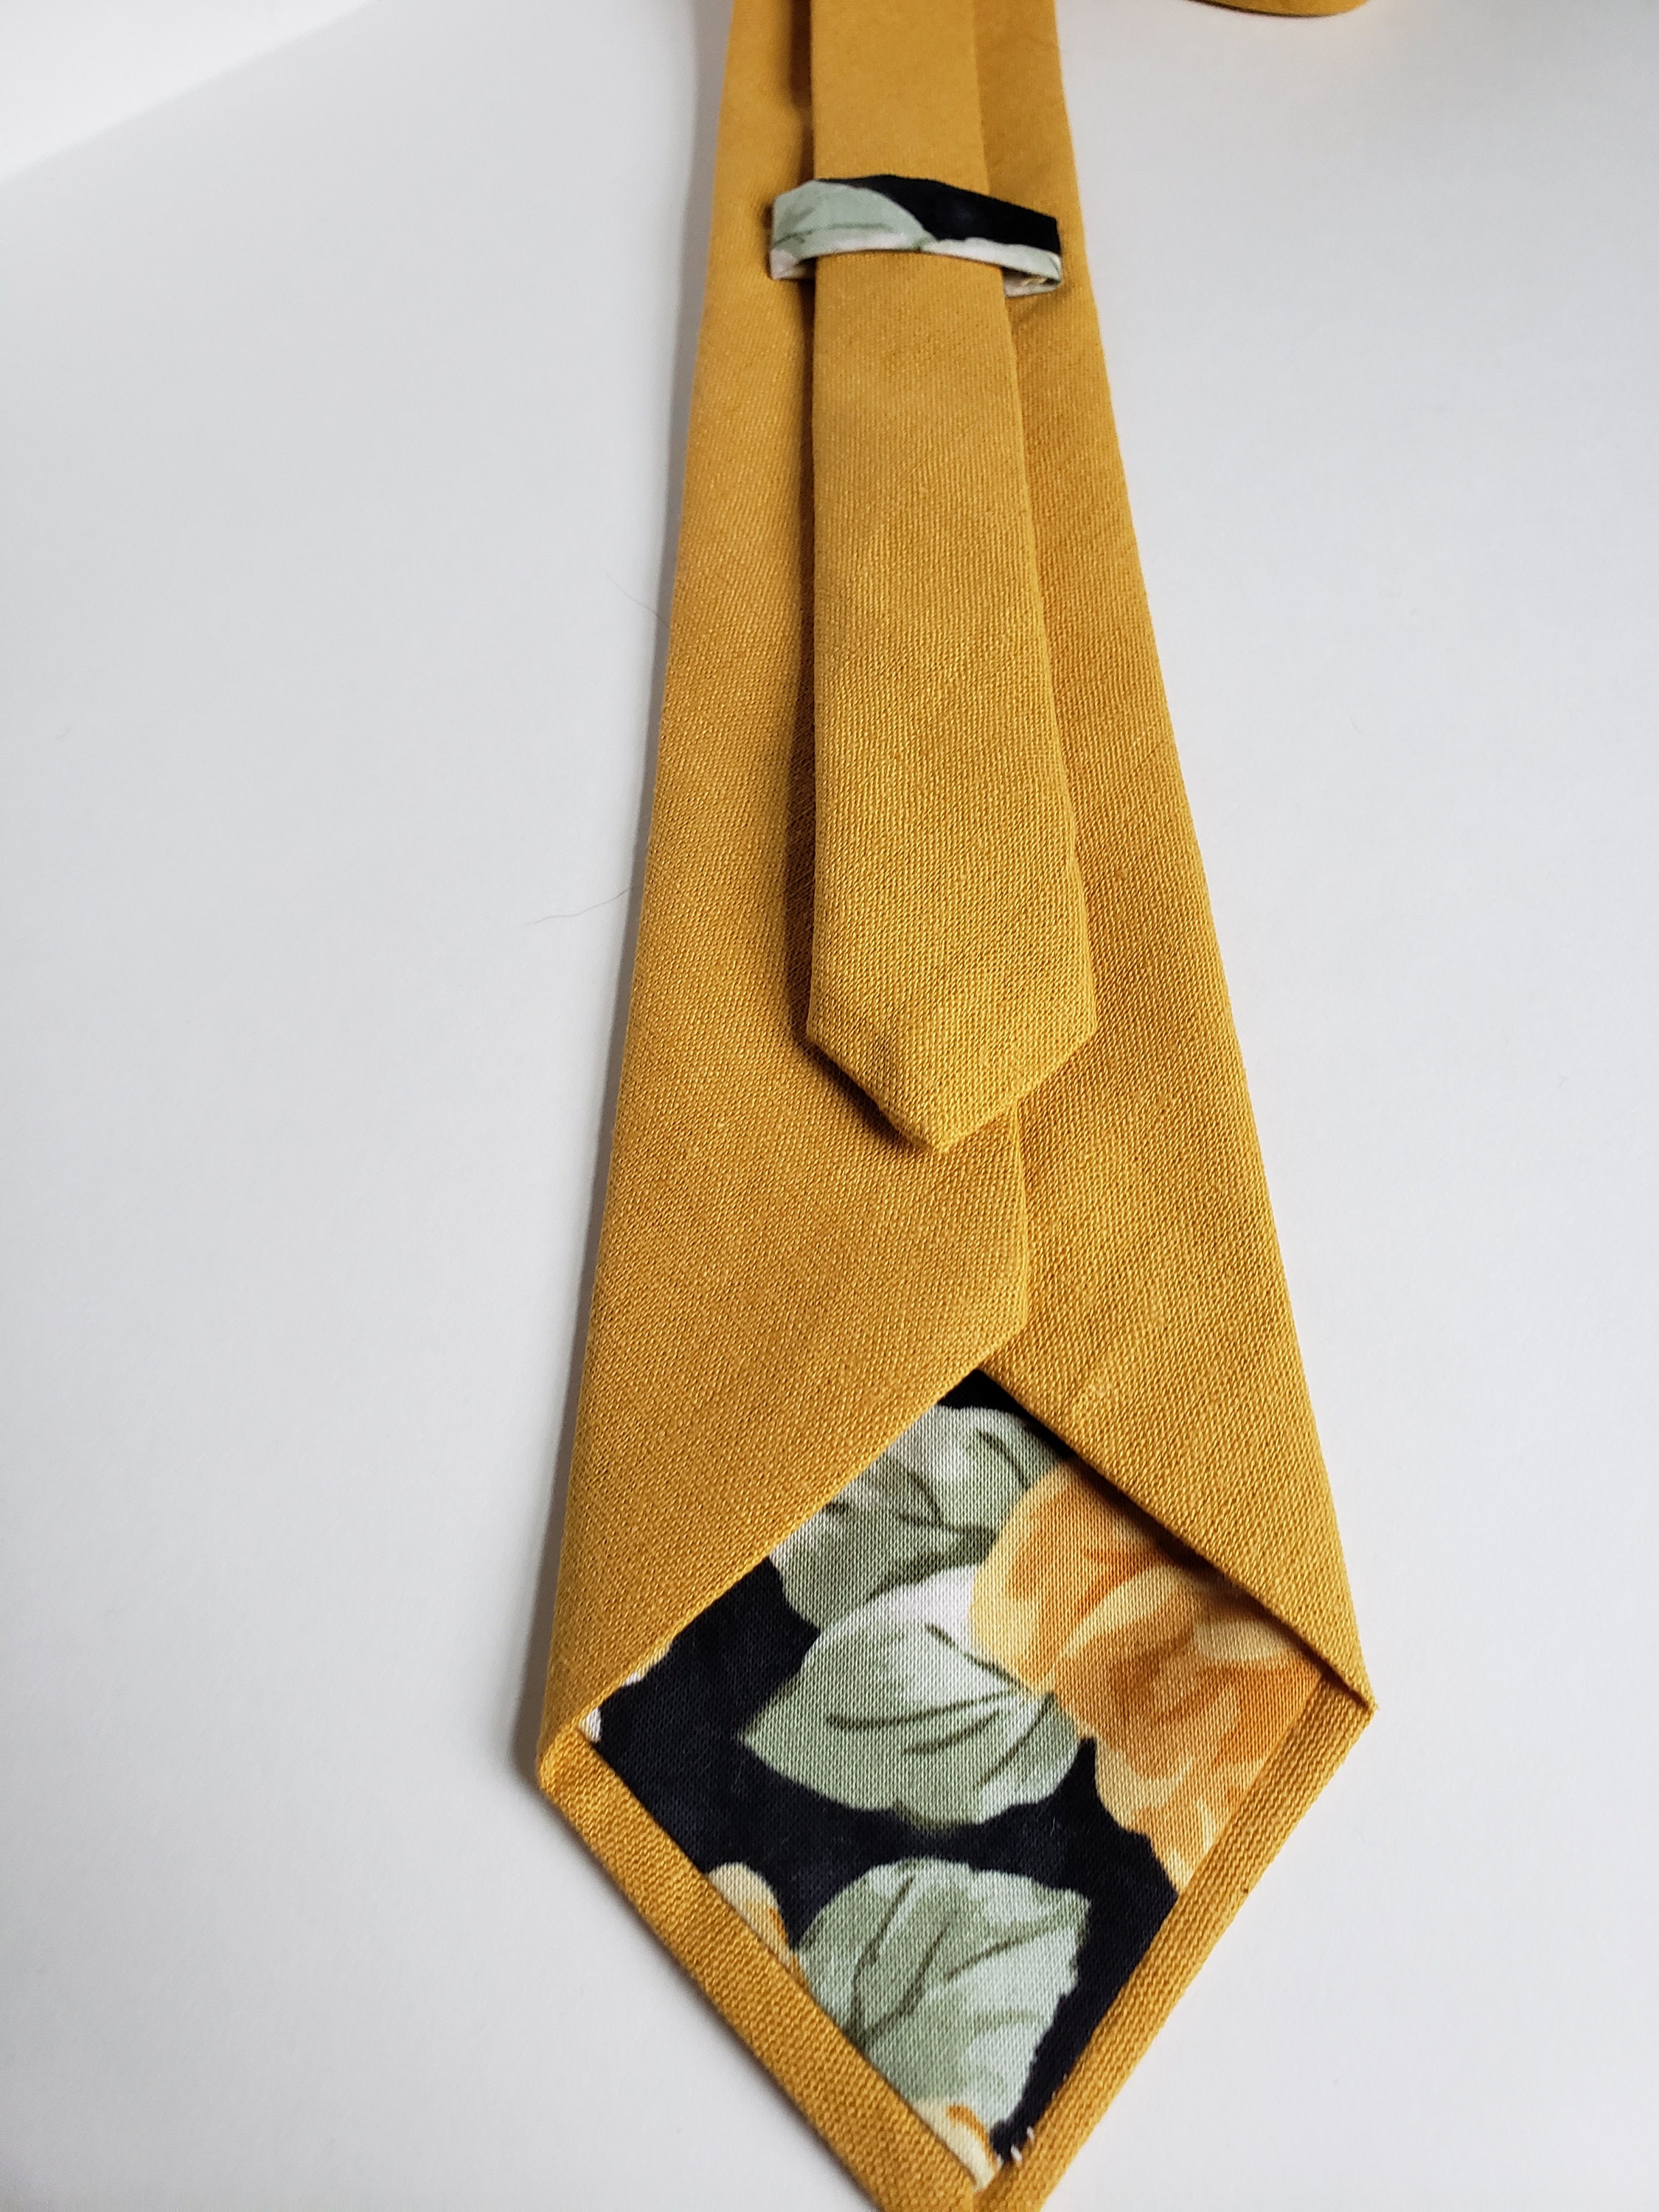 NATE Mustard Tie Handmade Tie Father's Day Gift | Etsy